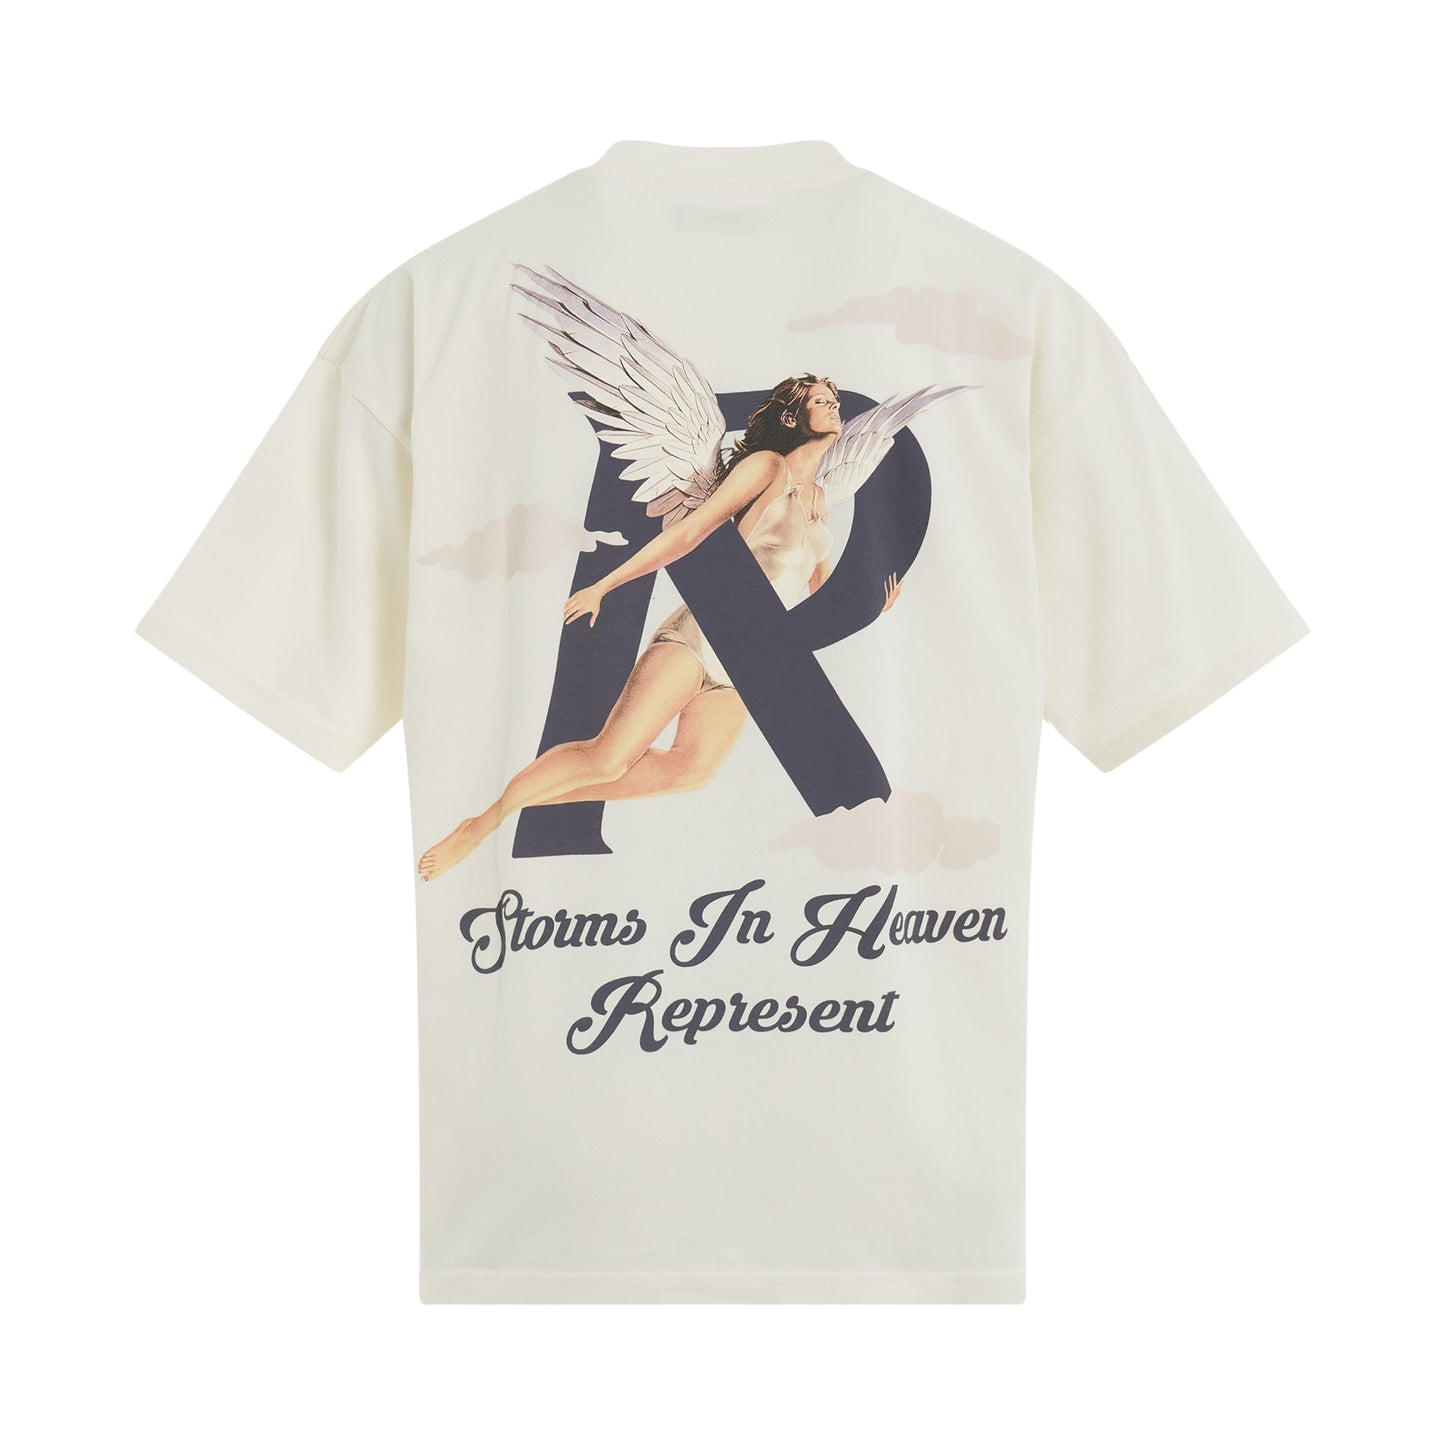 Storms in Heaven T-Shirt in Flat White